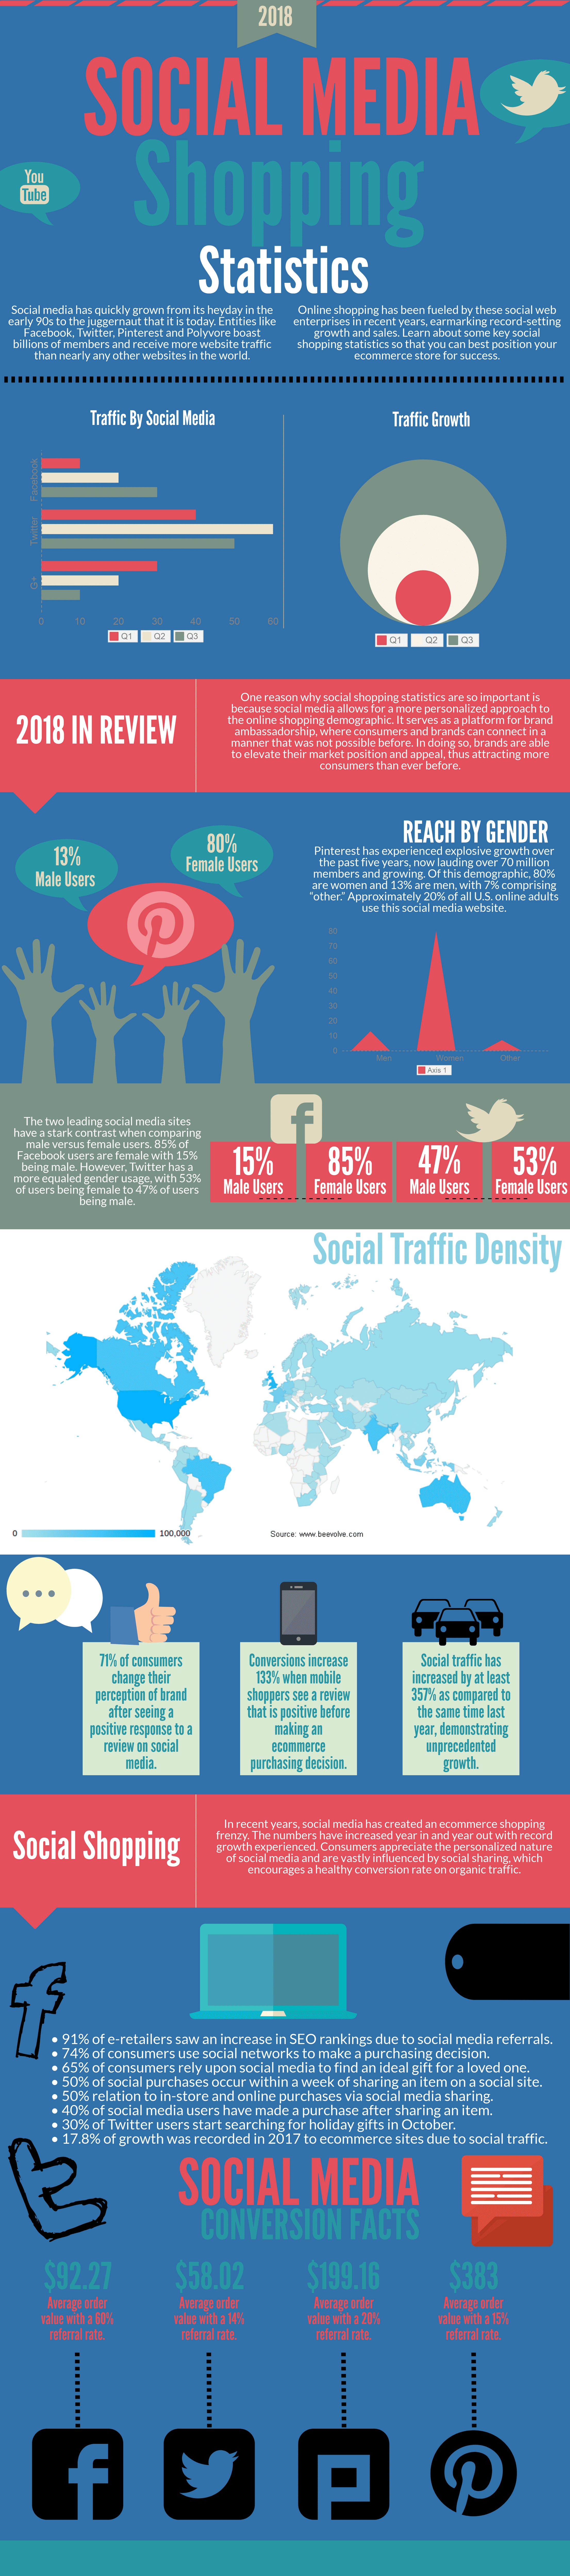 2018 social commerce facts